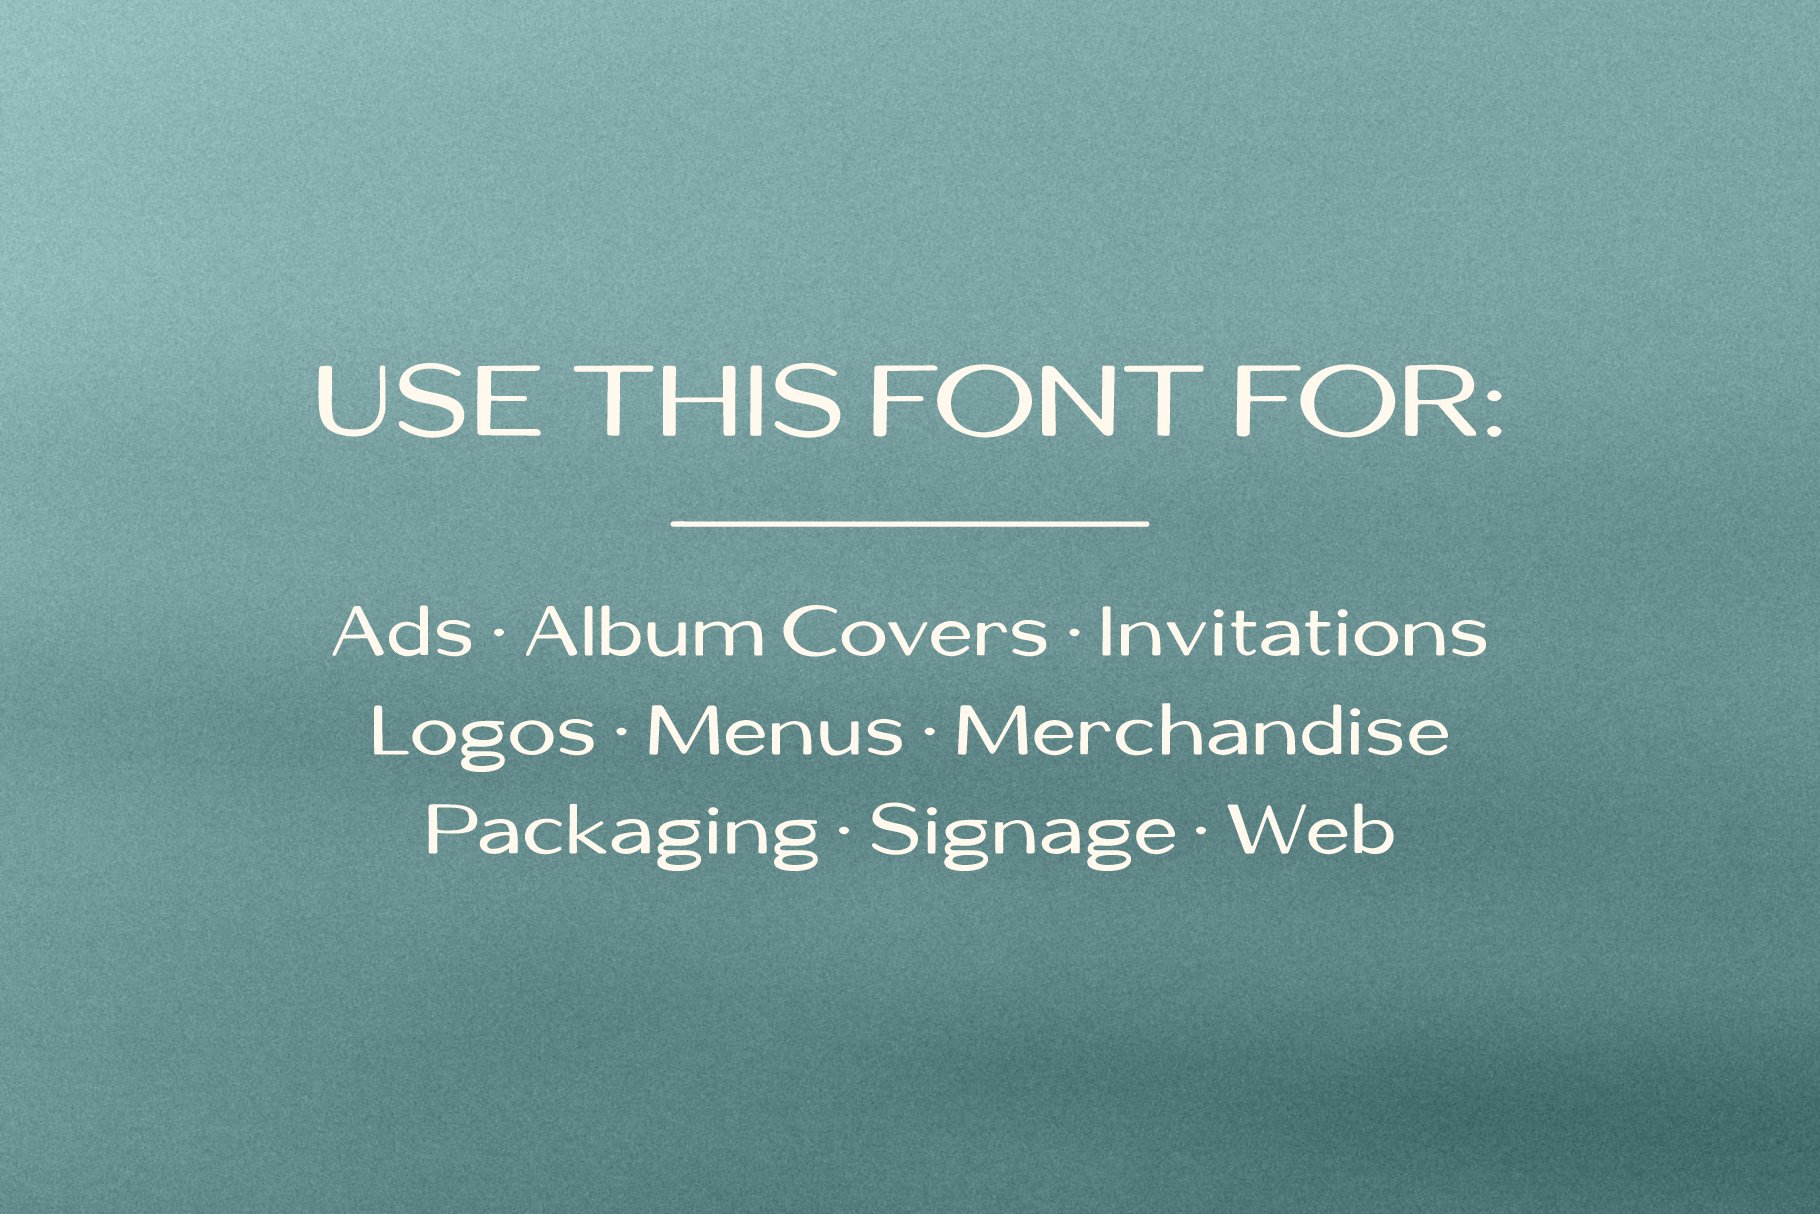 coastal bruised goods font feature images 04 27